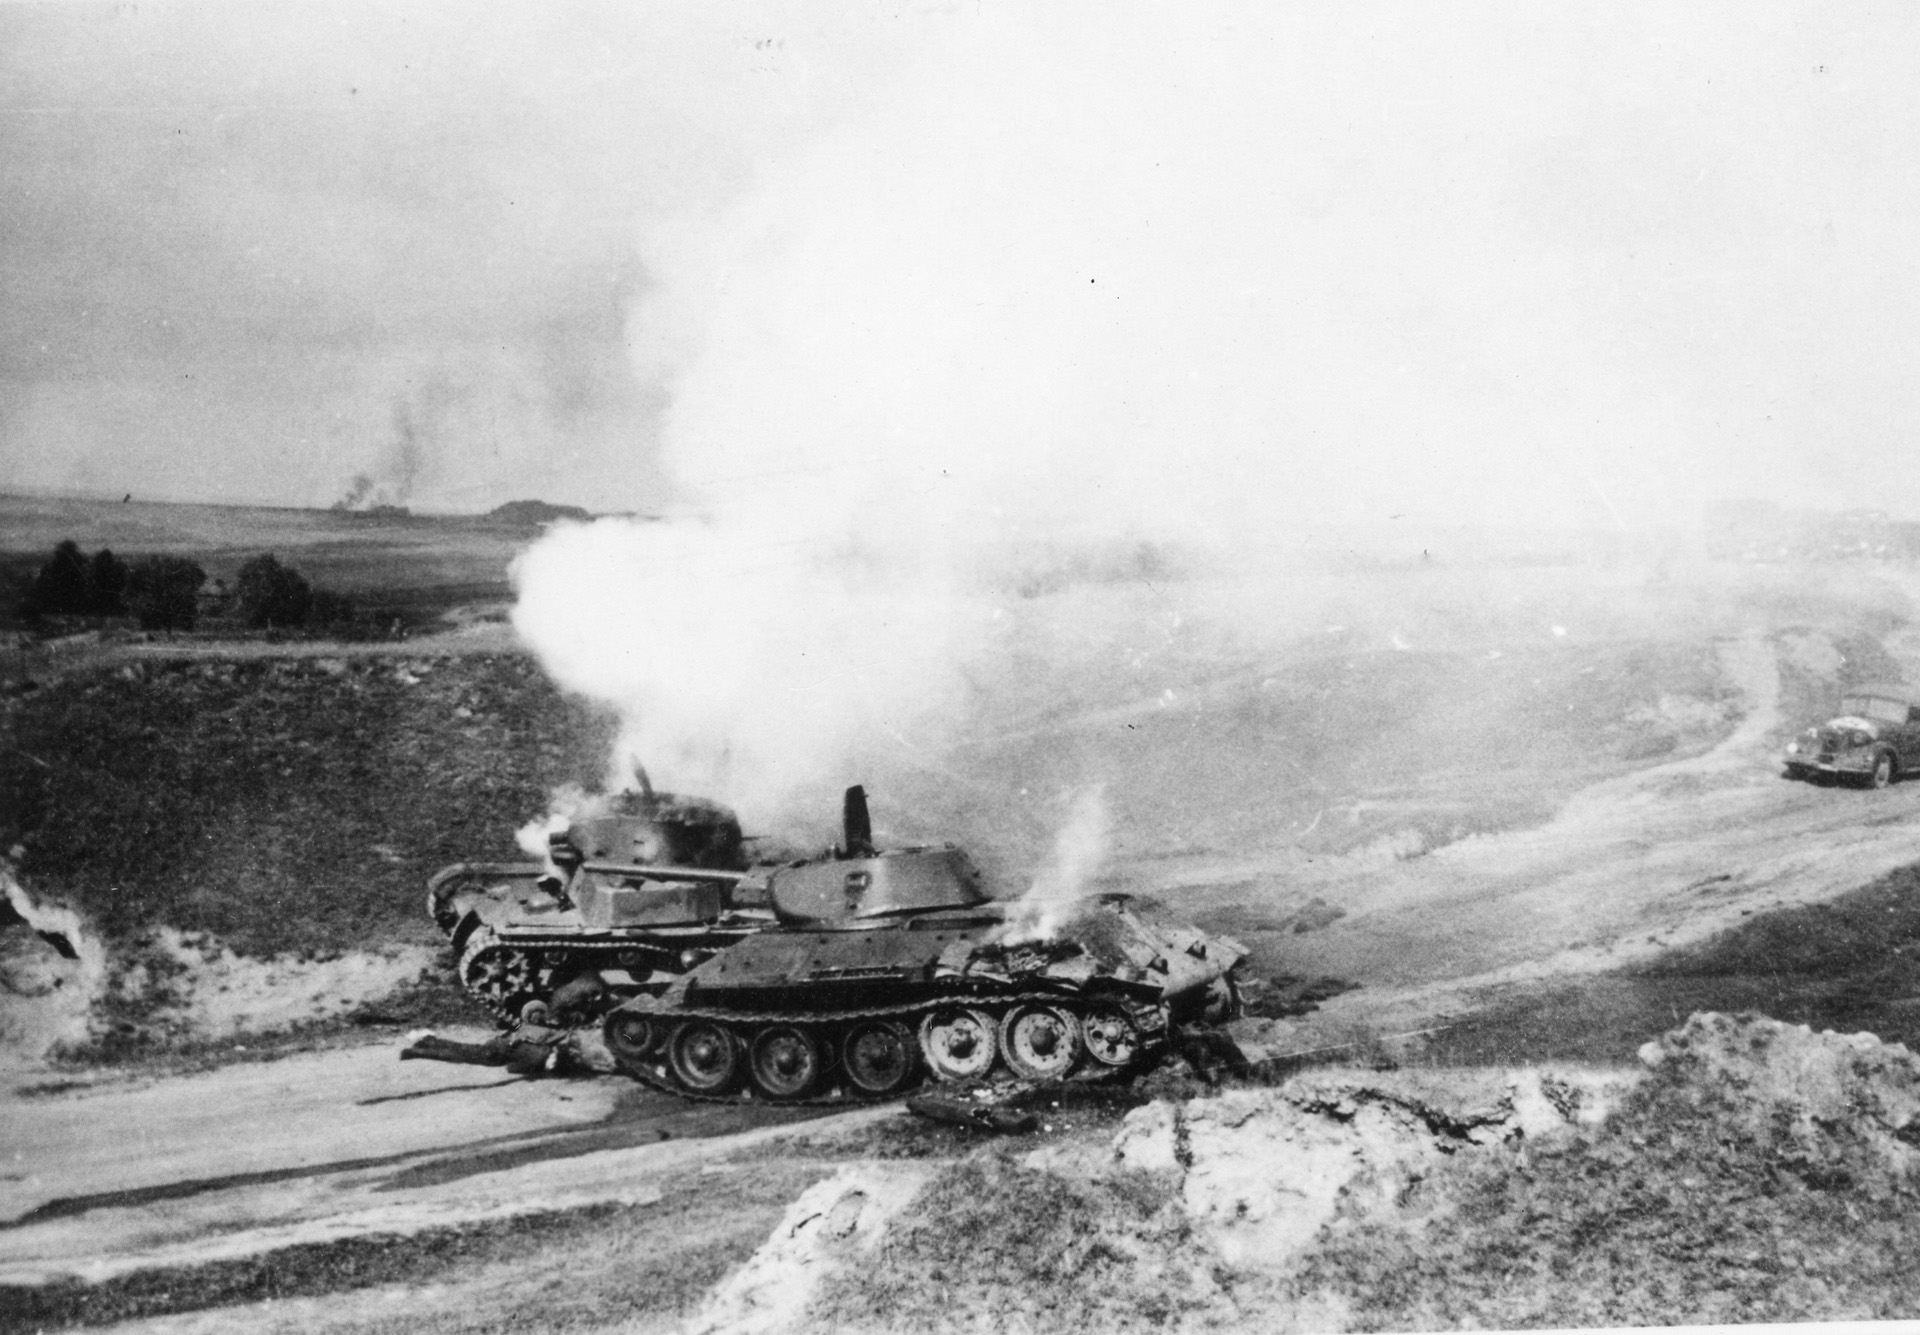 A Soviet T-34 tank (foreground) and another unidentified armored vehicle smolder after being hit by German antitank fire. As a forward observer, Lubbeck managed to stop an armored attack by directing a 150mm artillery piece to knock out two tanks.